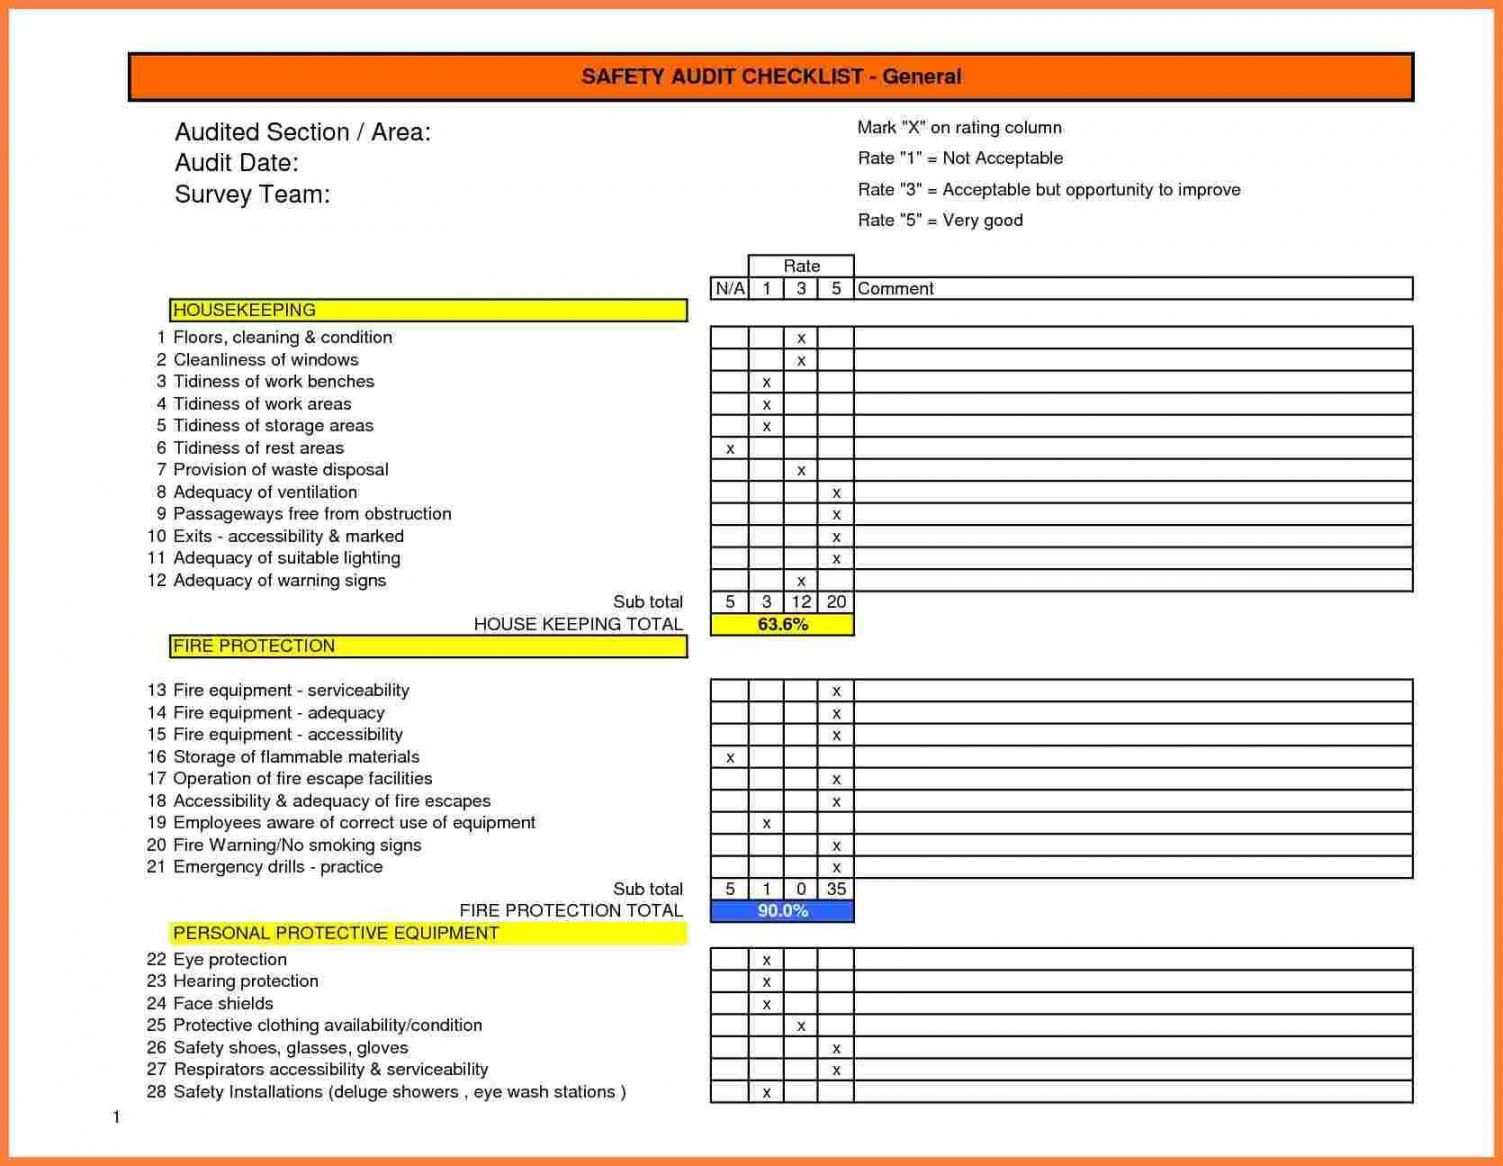 editable safety audit checklist template samples image result for warehouse warehouse safety inspection checklist template examples